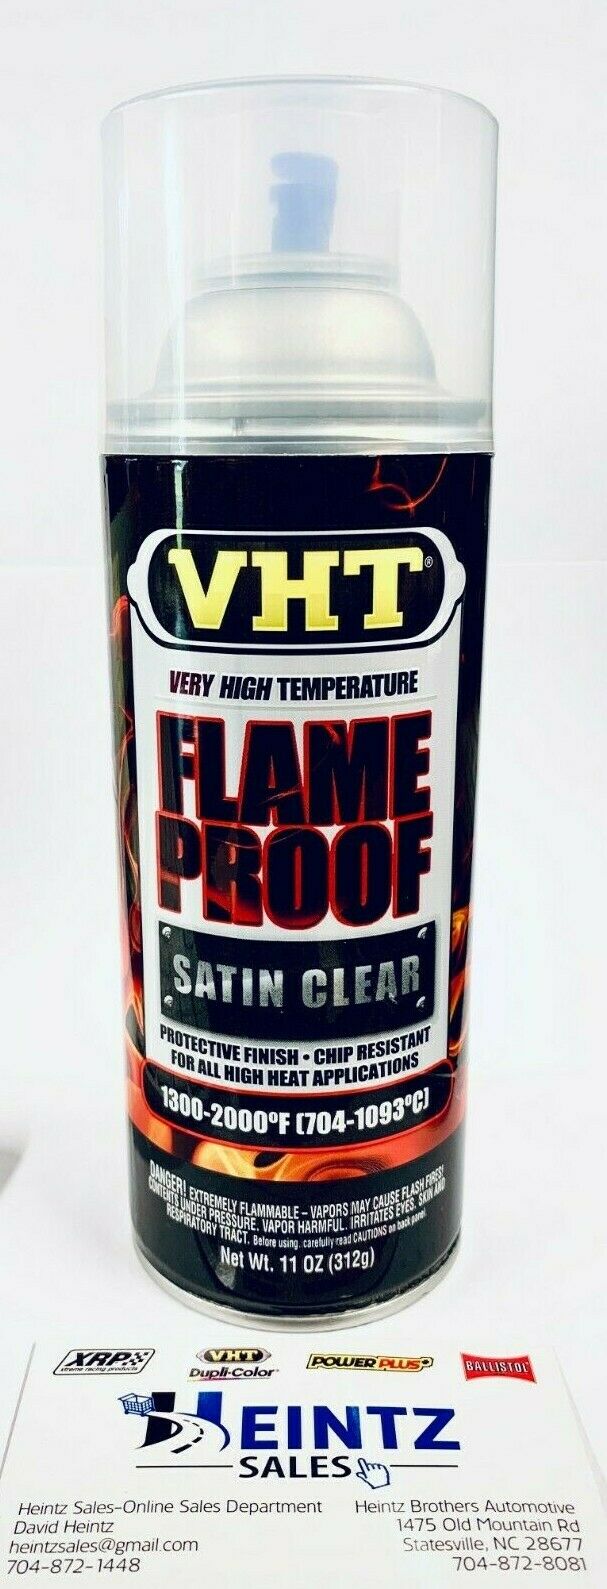 Vht Sp115 Flameproof Satin Clear Paint, Header Paint Silica Ceramic Coating 11oz